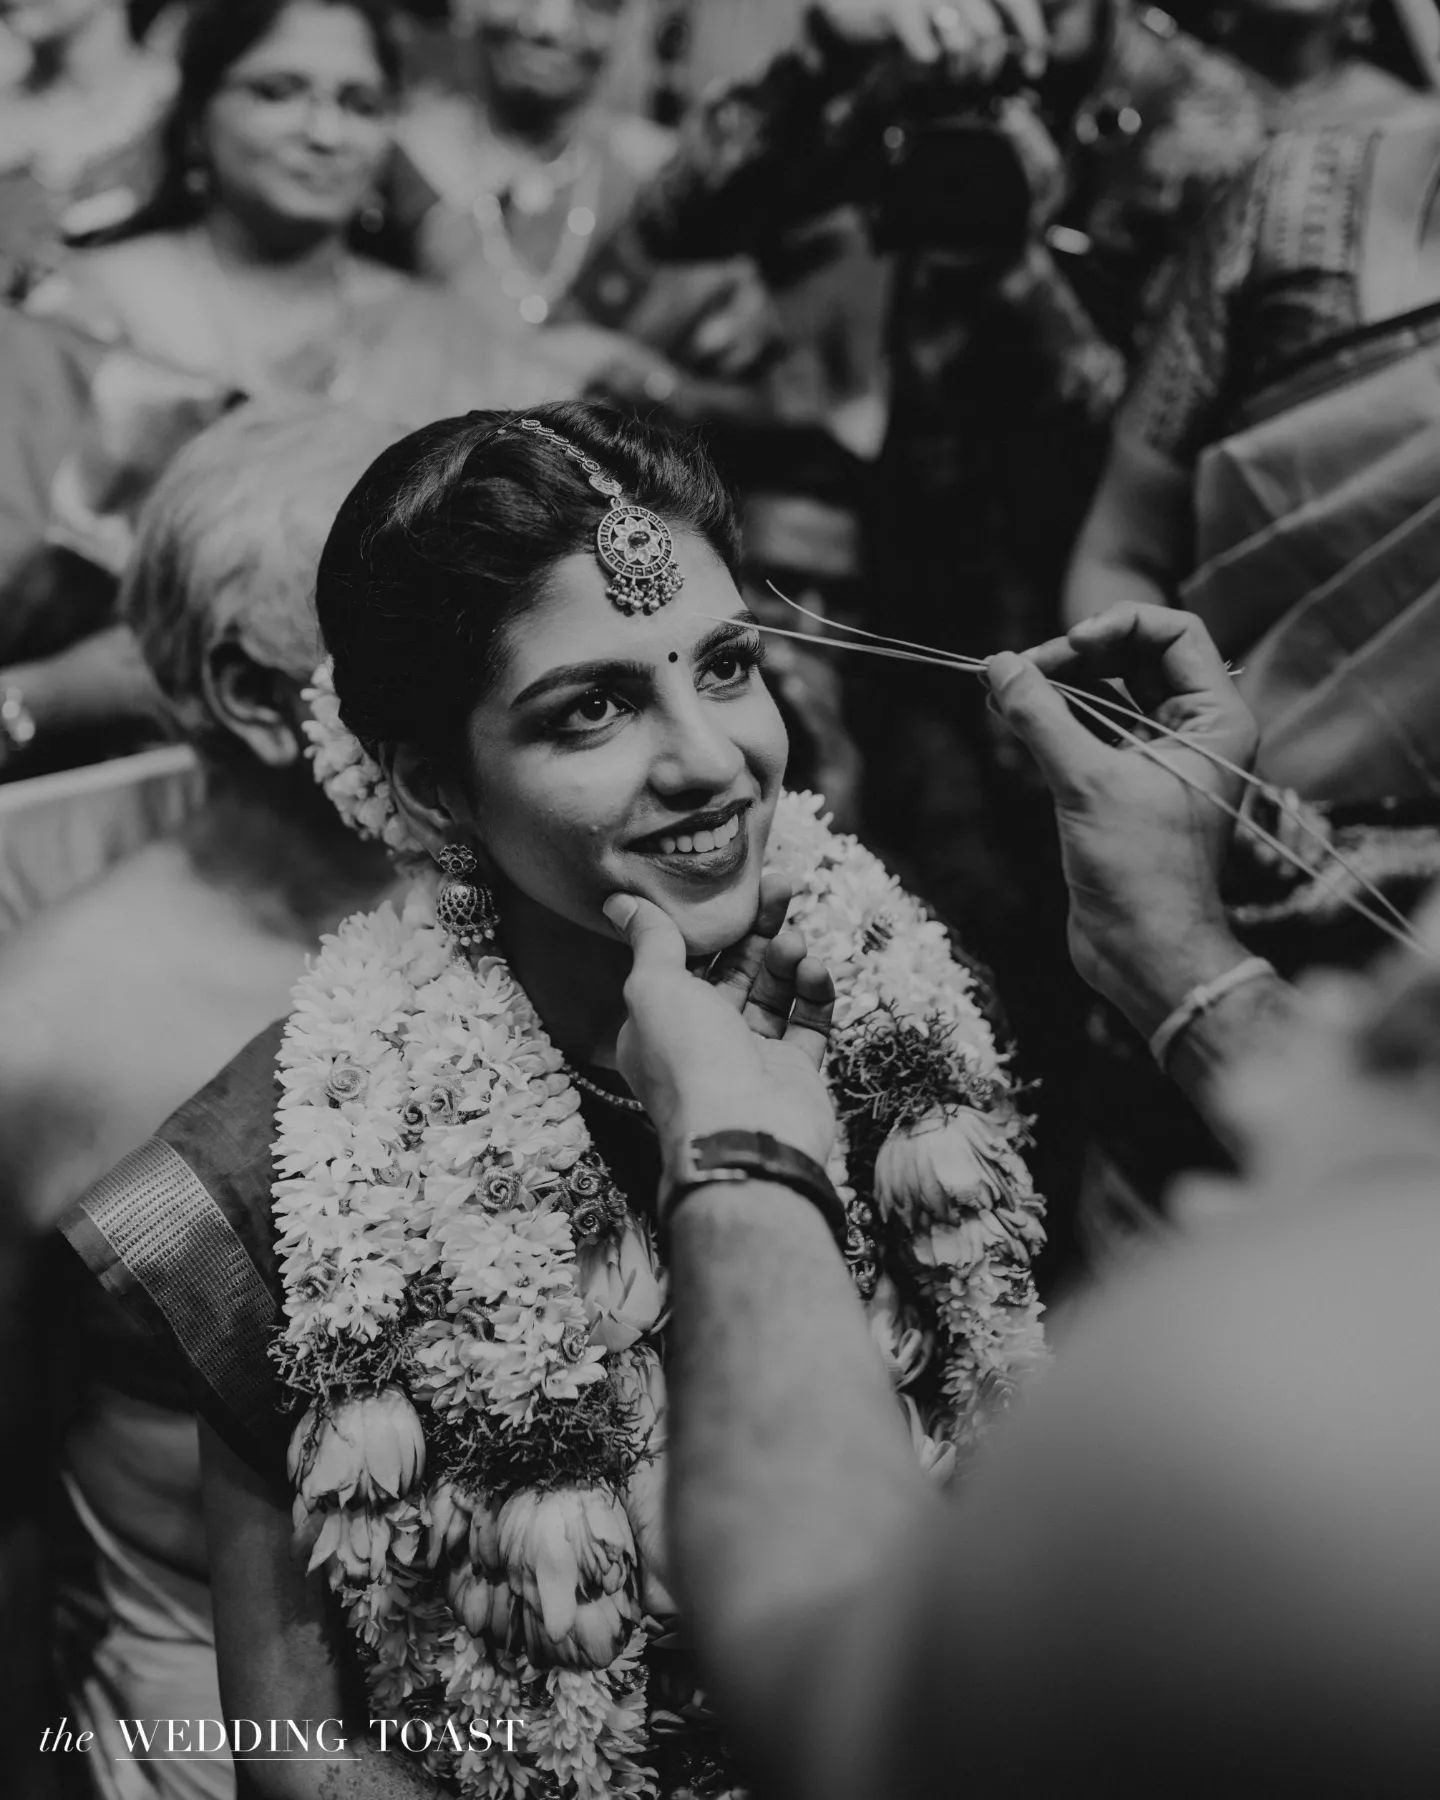 Darshana and Sooraj's connection is deeply rooted in their cultural heritage. Sooraj, a talented guitarist, first met Darshana on the lively streets of Chennai, and their love story unfolded. 

Their wedding in Chennai was a beautiful celebration, hi